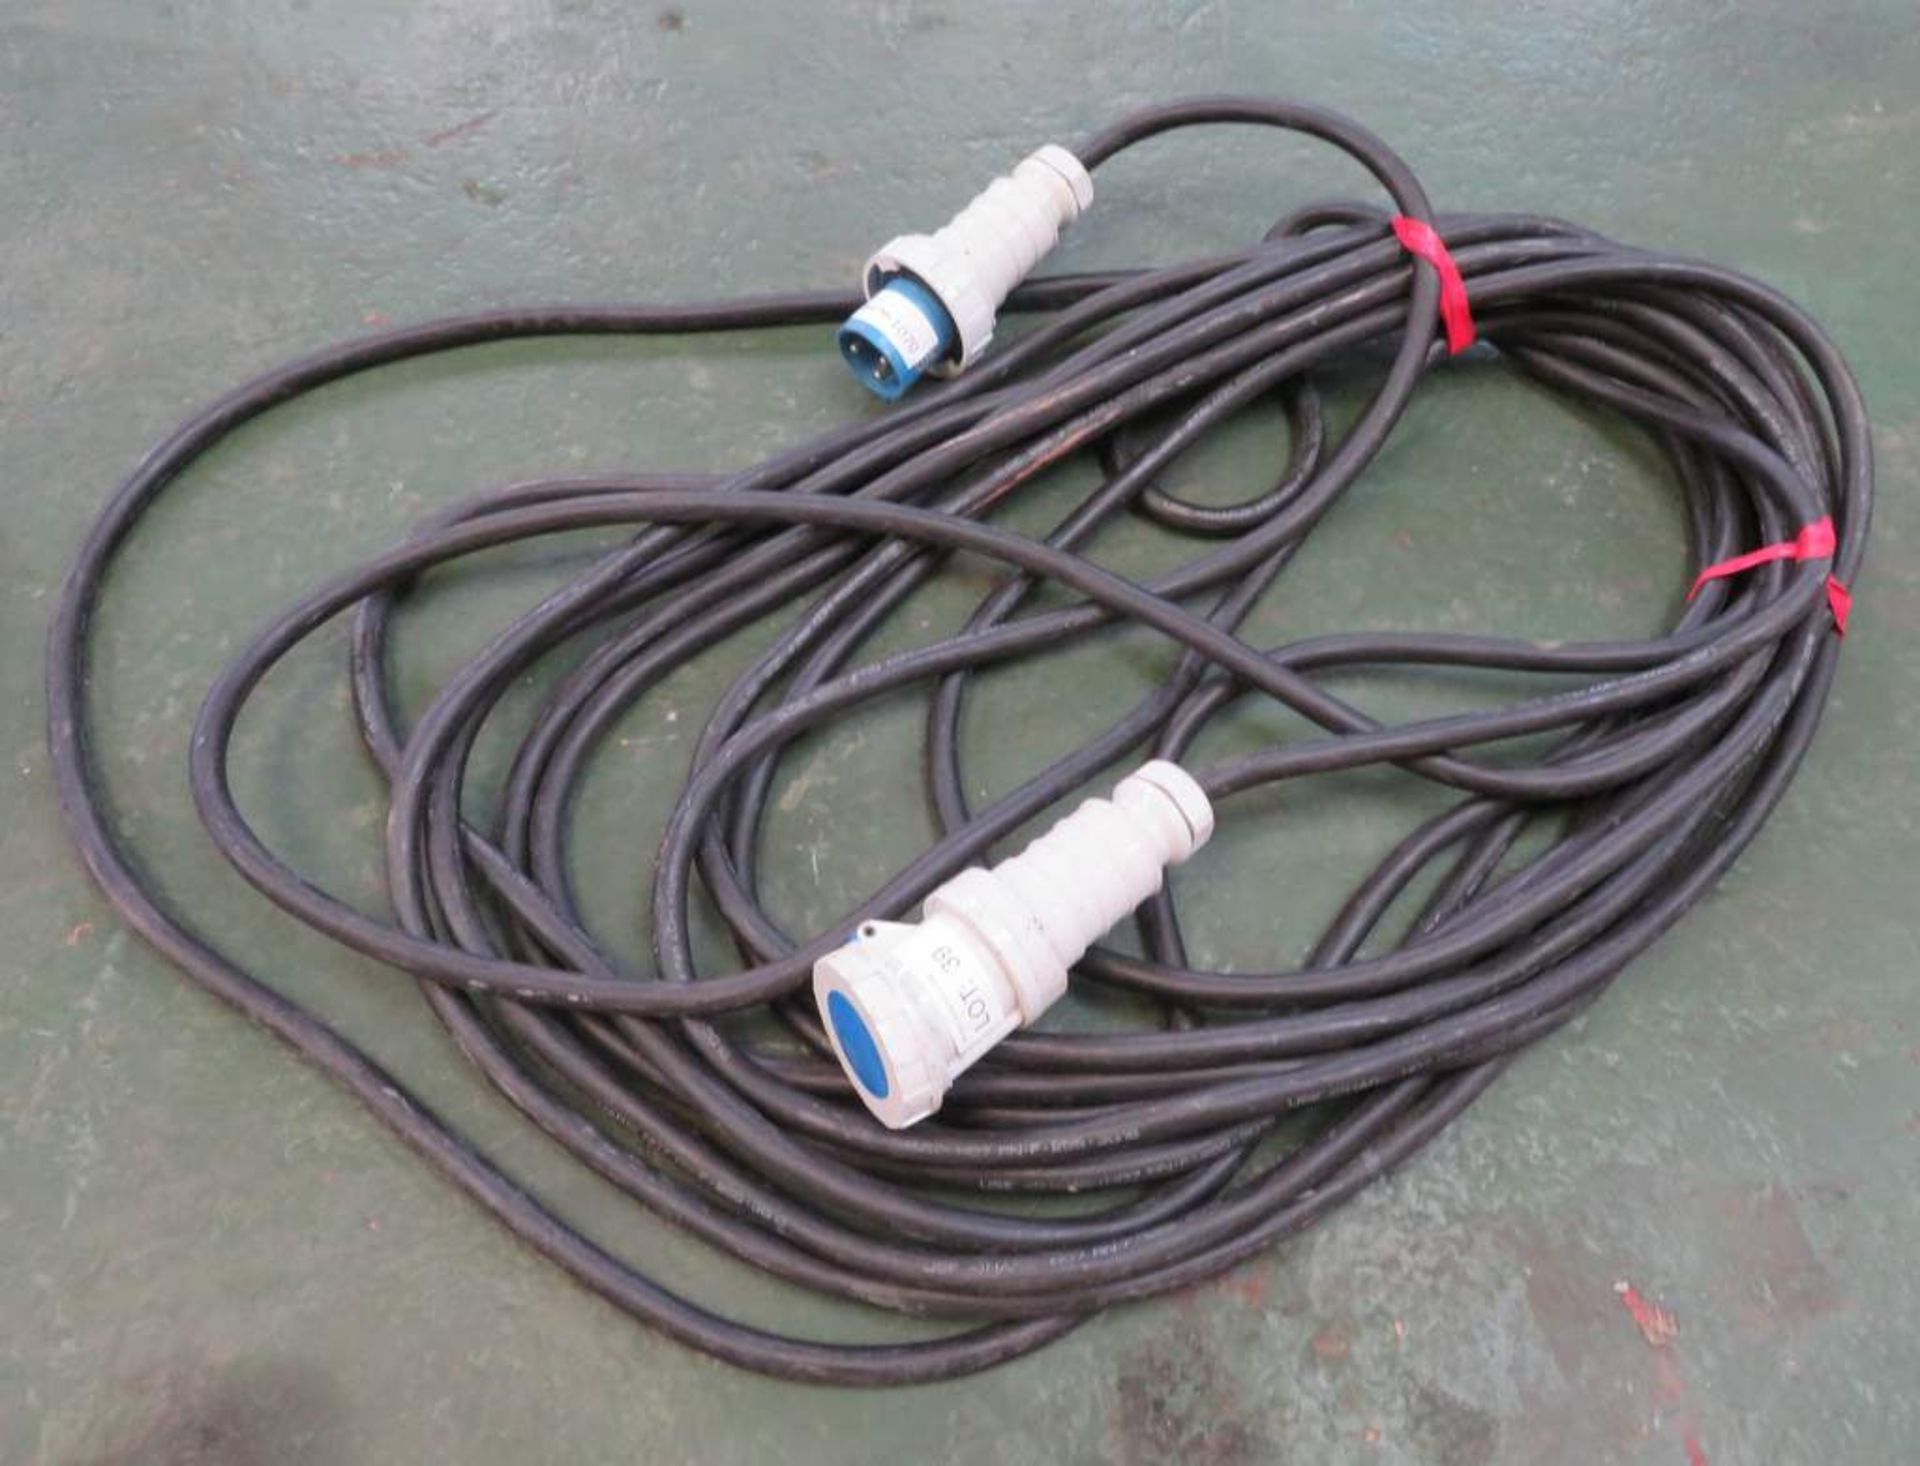 20 metre 63A 1 phase cable